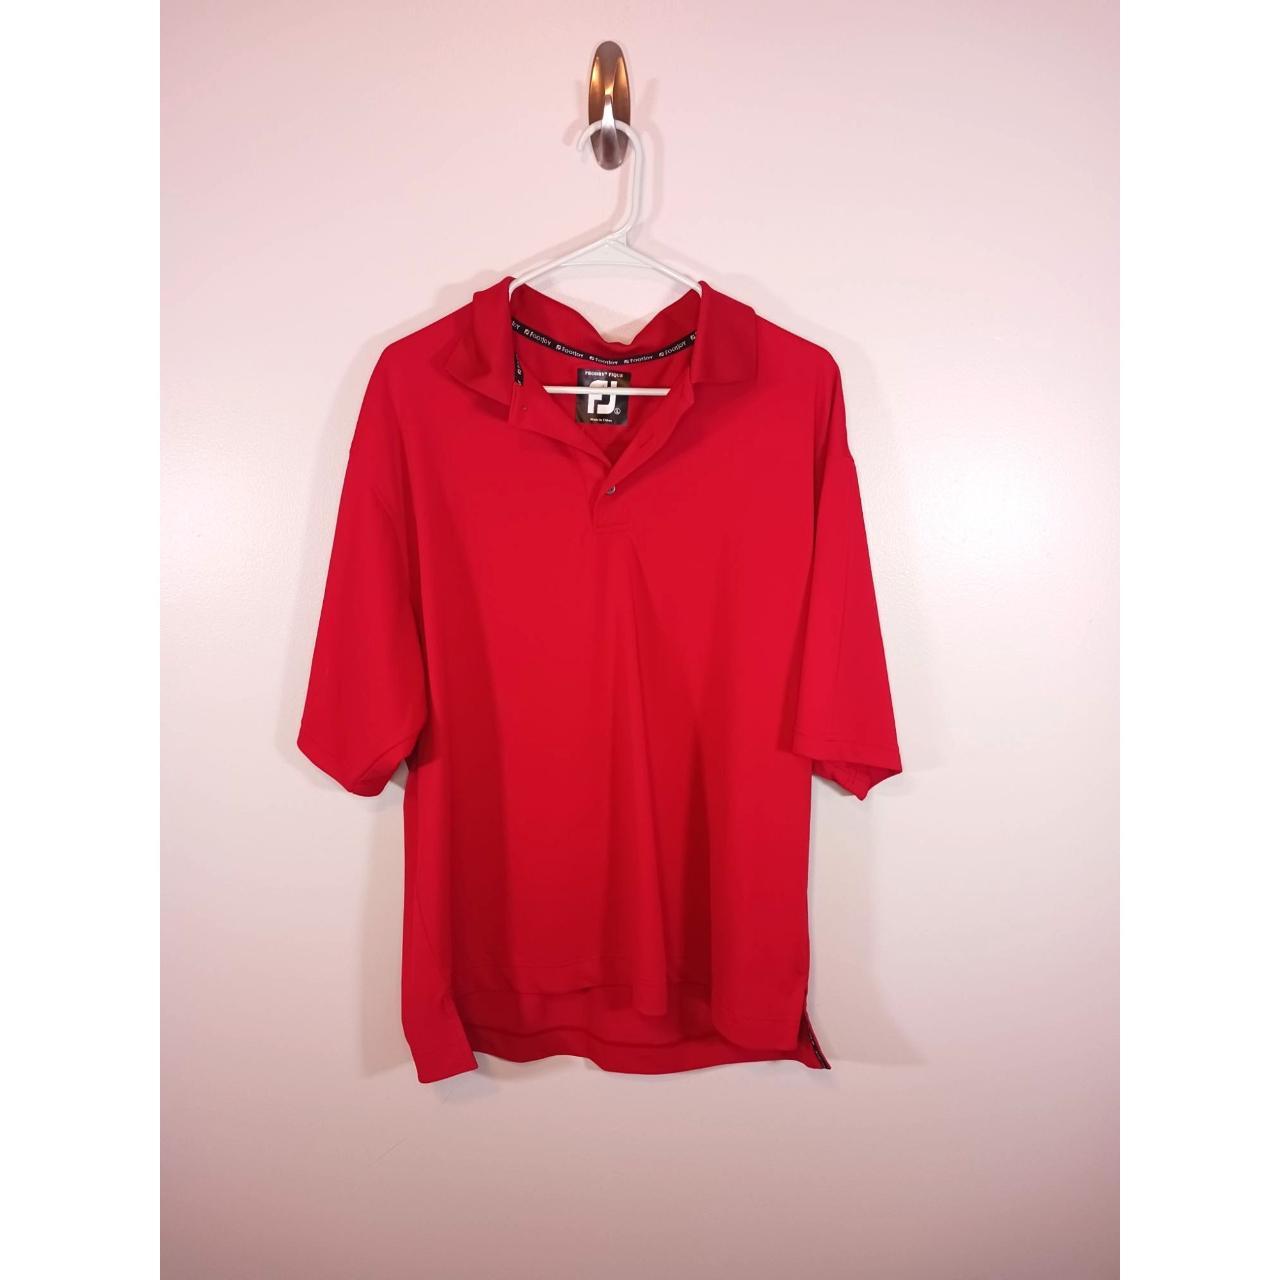 FootJoy Red Men's Golf Polo Size L. Small hole.... - Depop